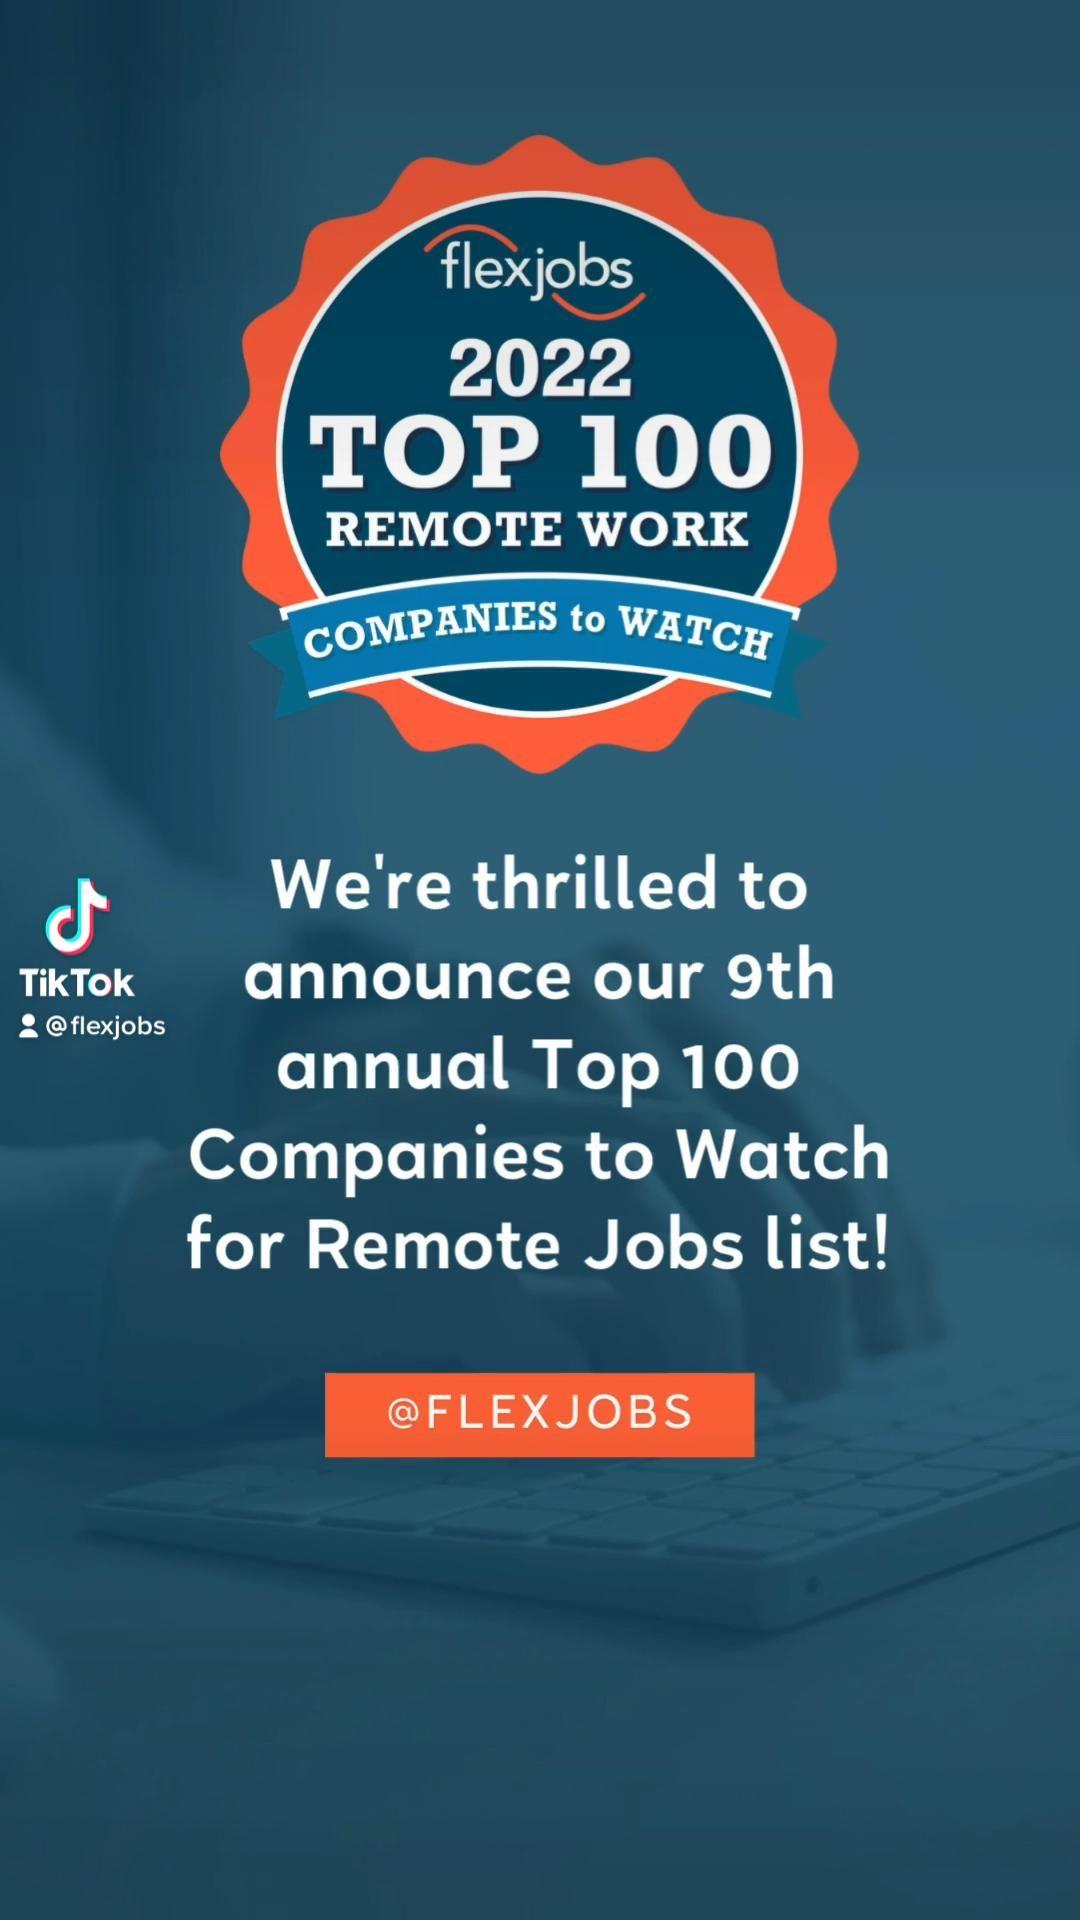 The Top 100 Companies For Remote Jobs In 2022 